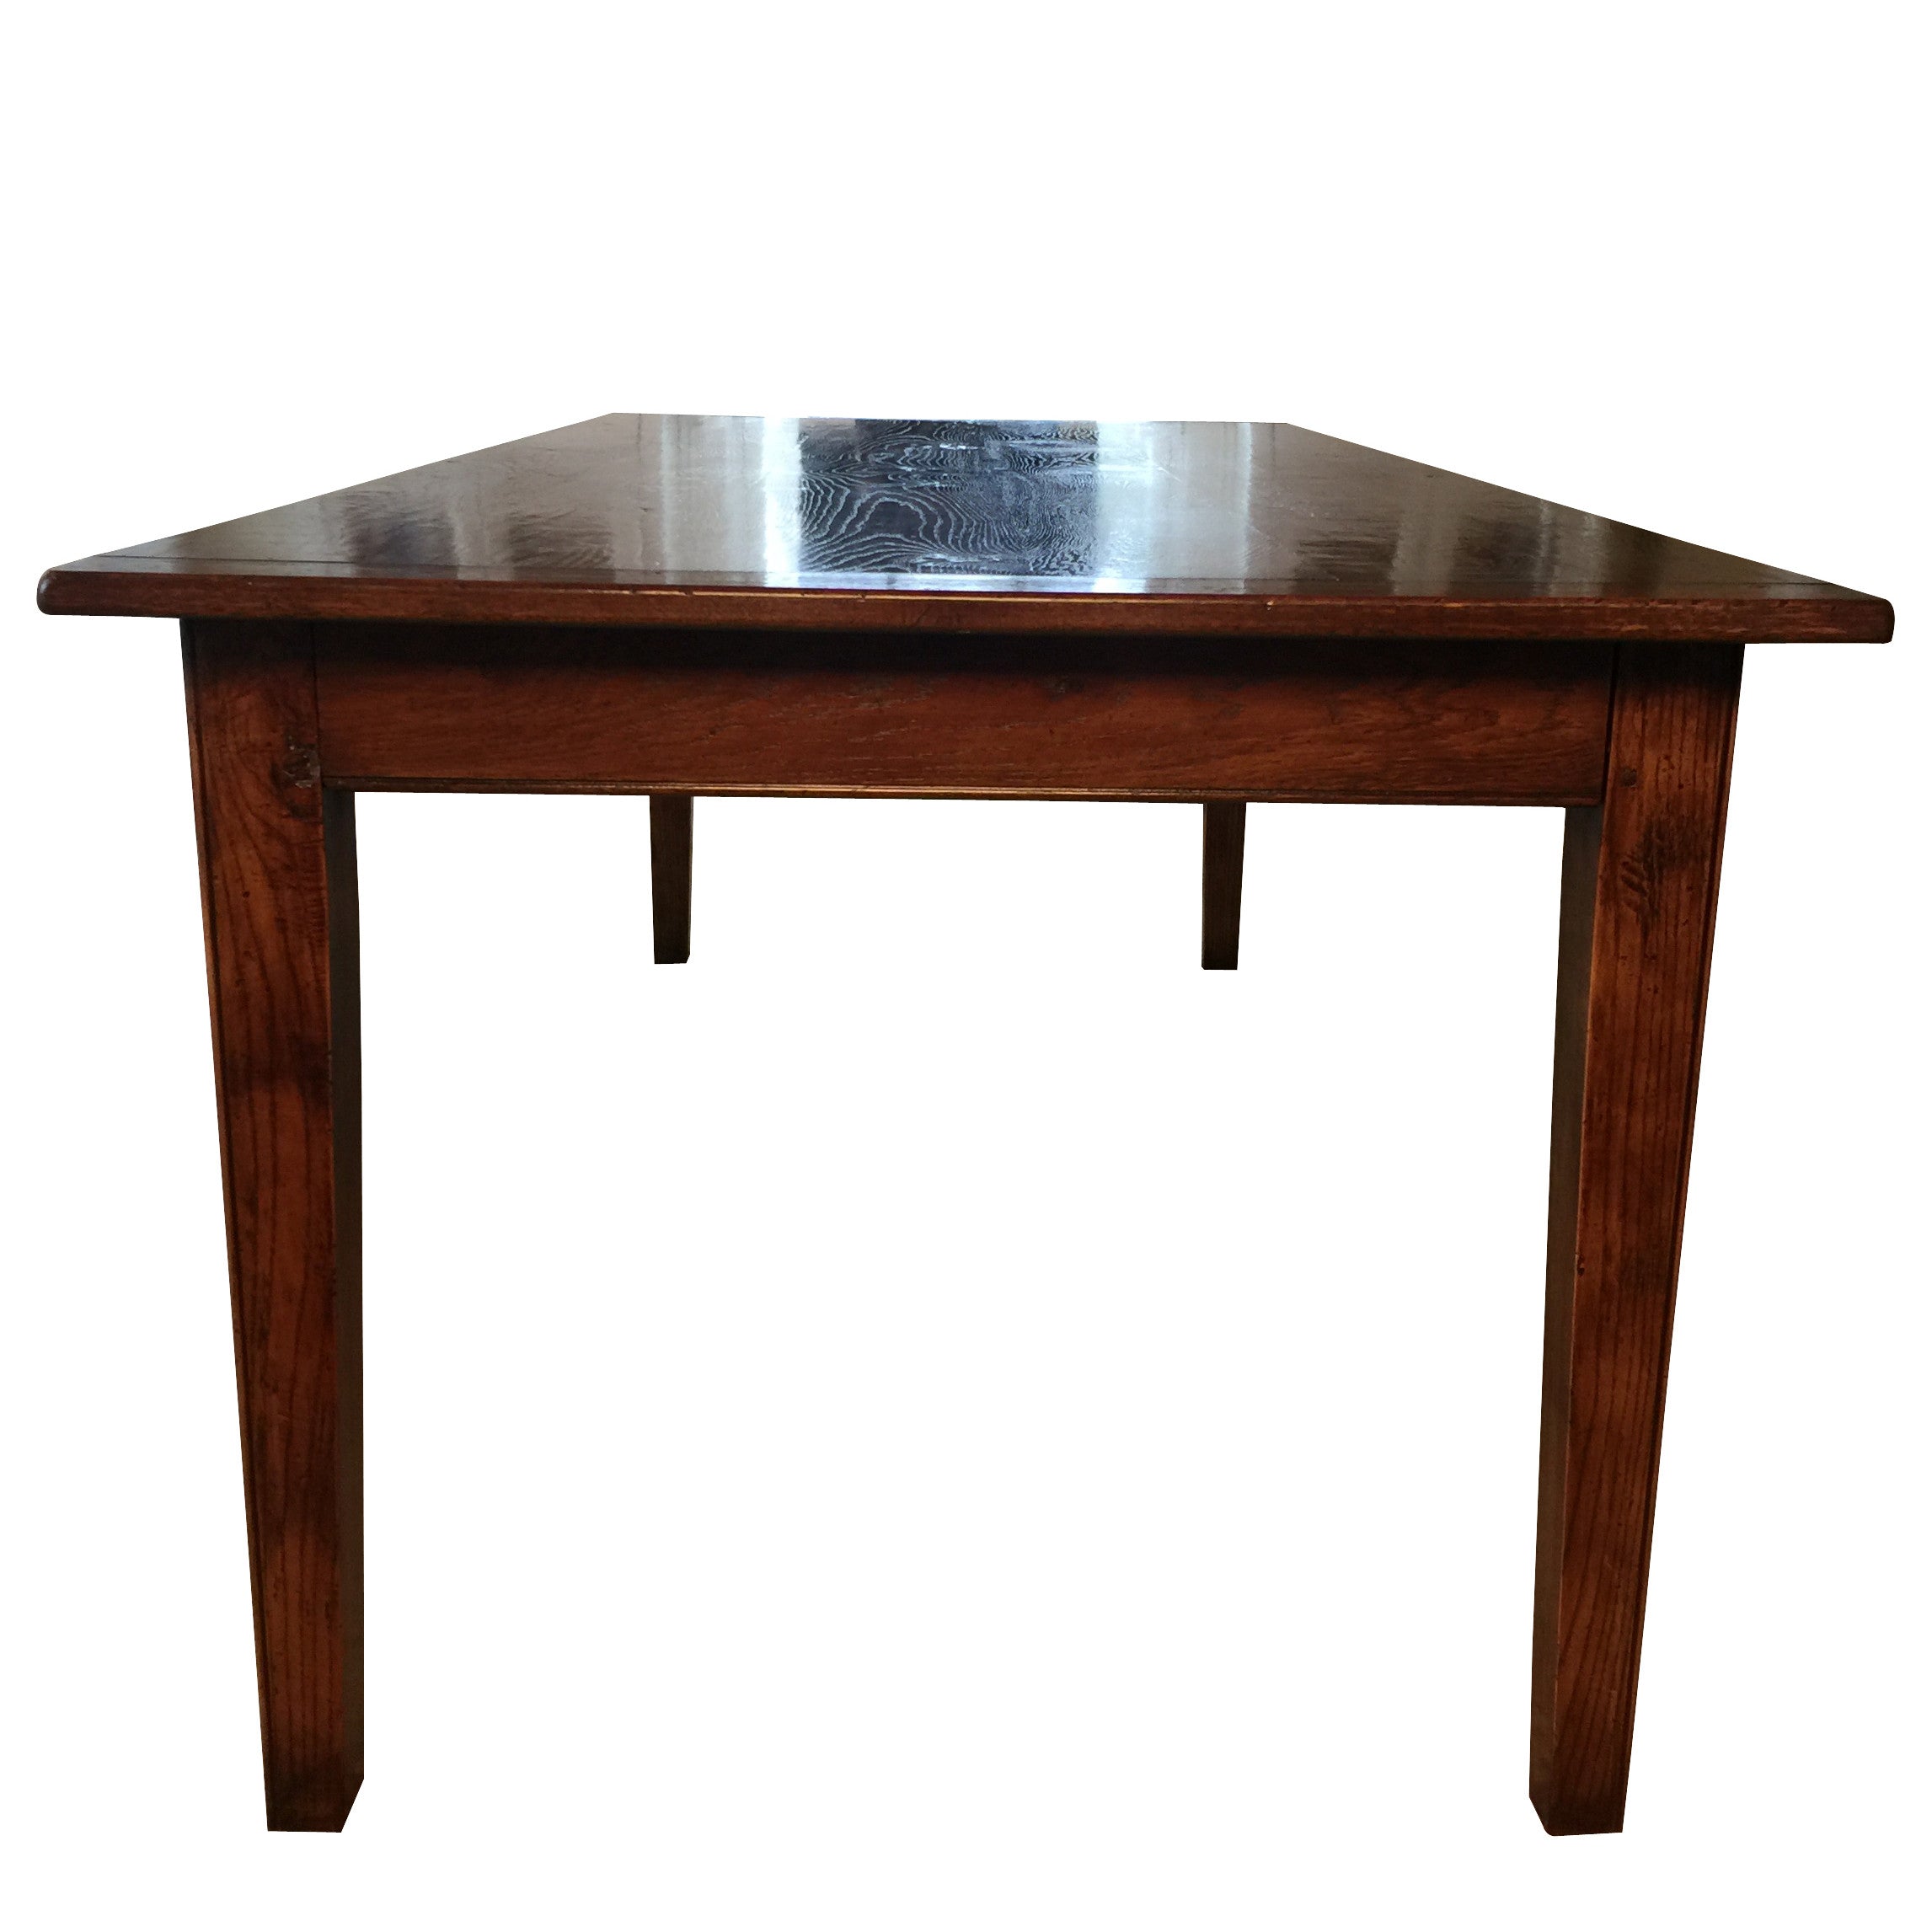 English Farm Table with Expandable Ends